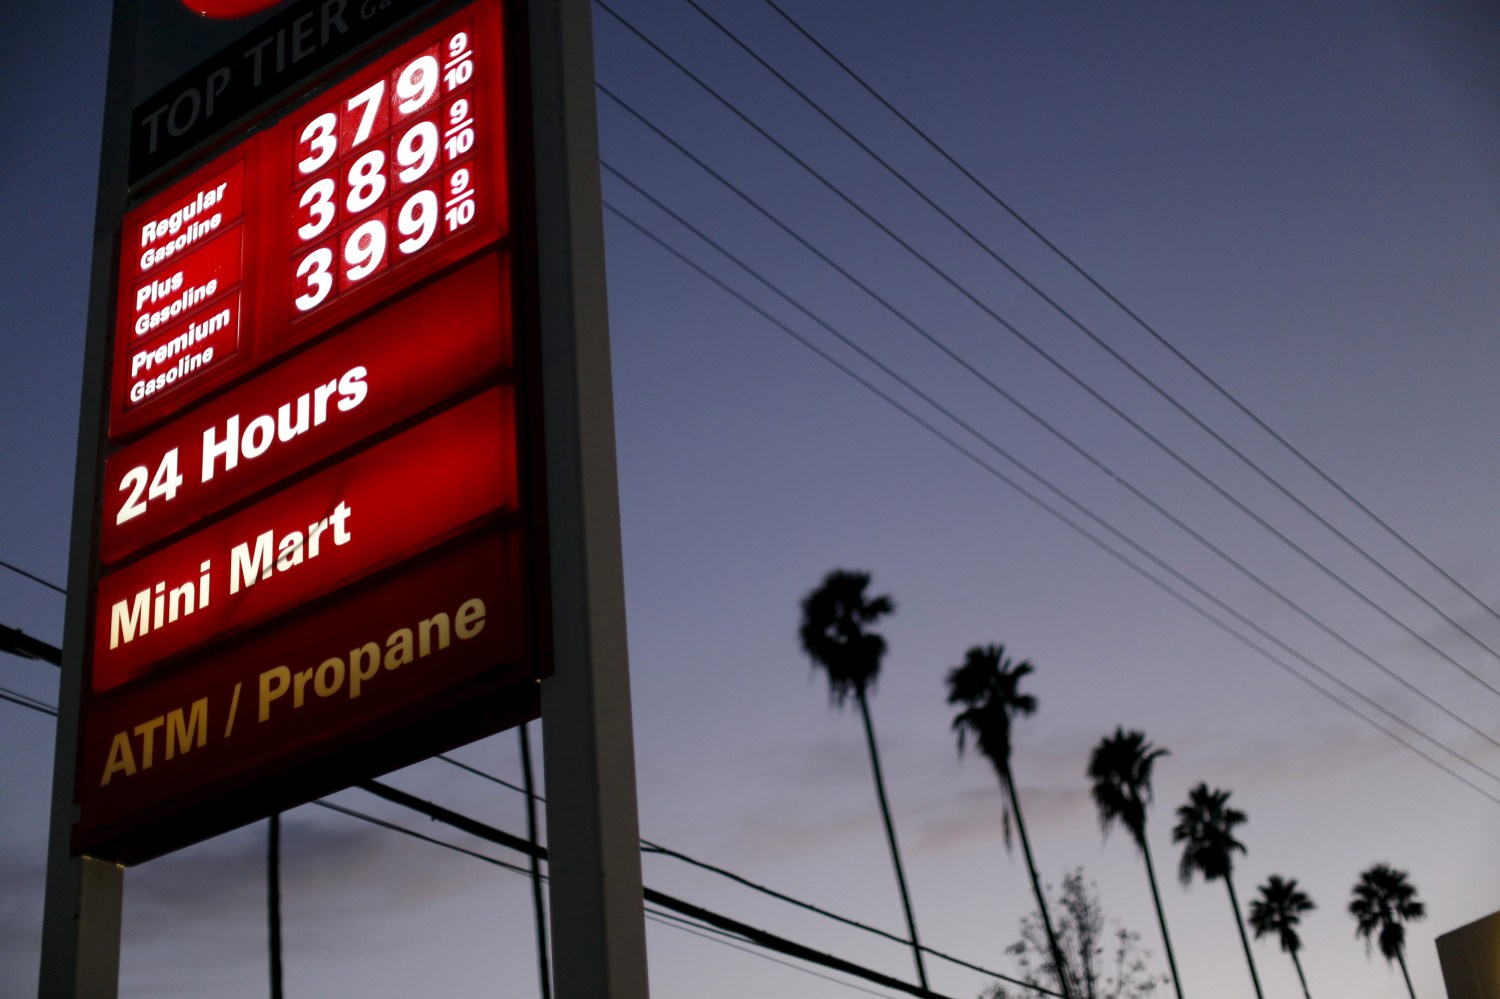 Regular unleaded petrol is seen priced at $3.79 per gallon ($1 per litre) at a 76 gas station in Los Angeles, California February 4, 2016. REUTERS/Mario Anzuoni